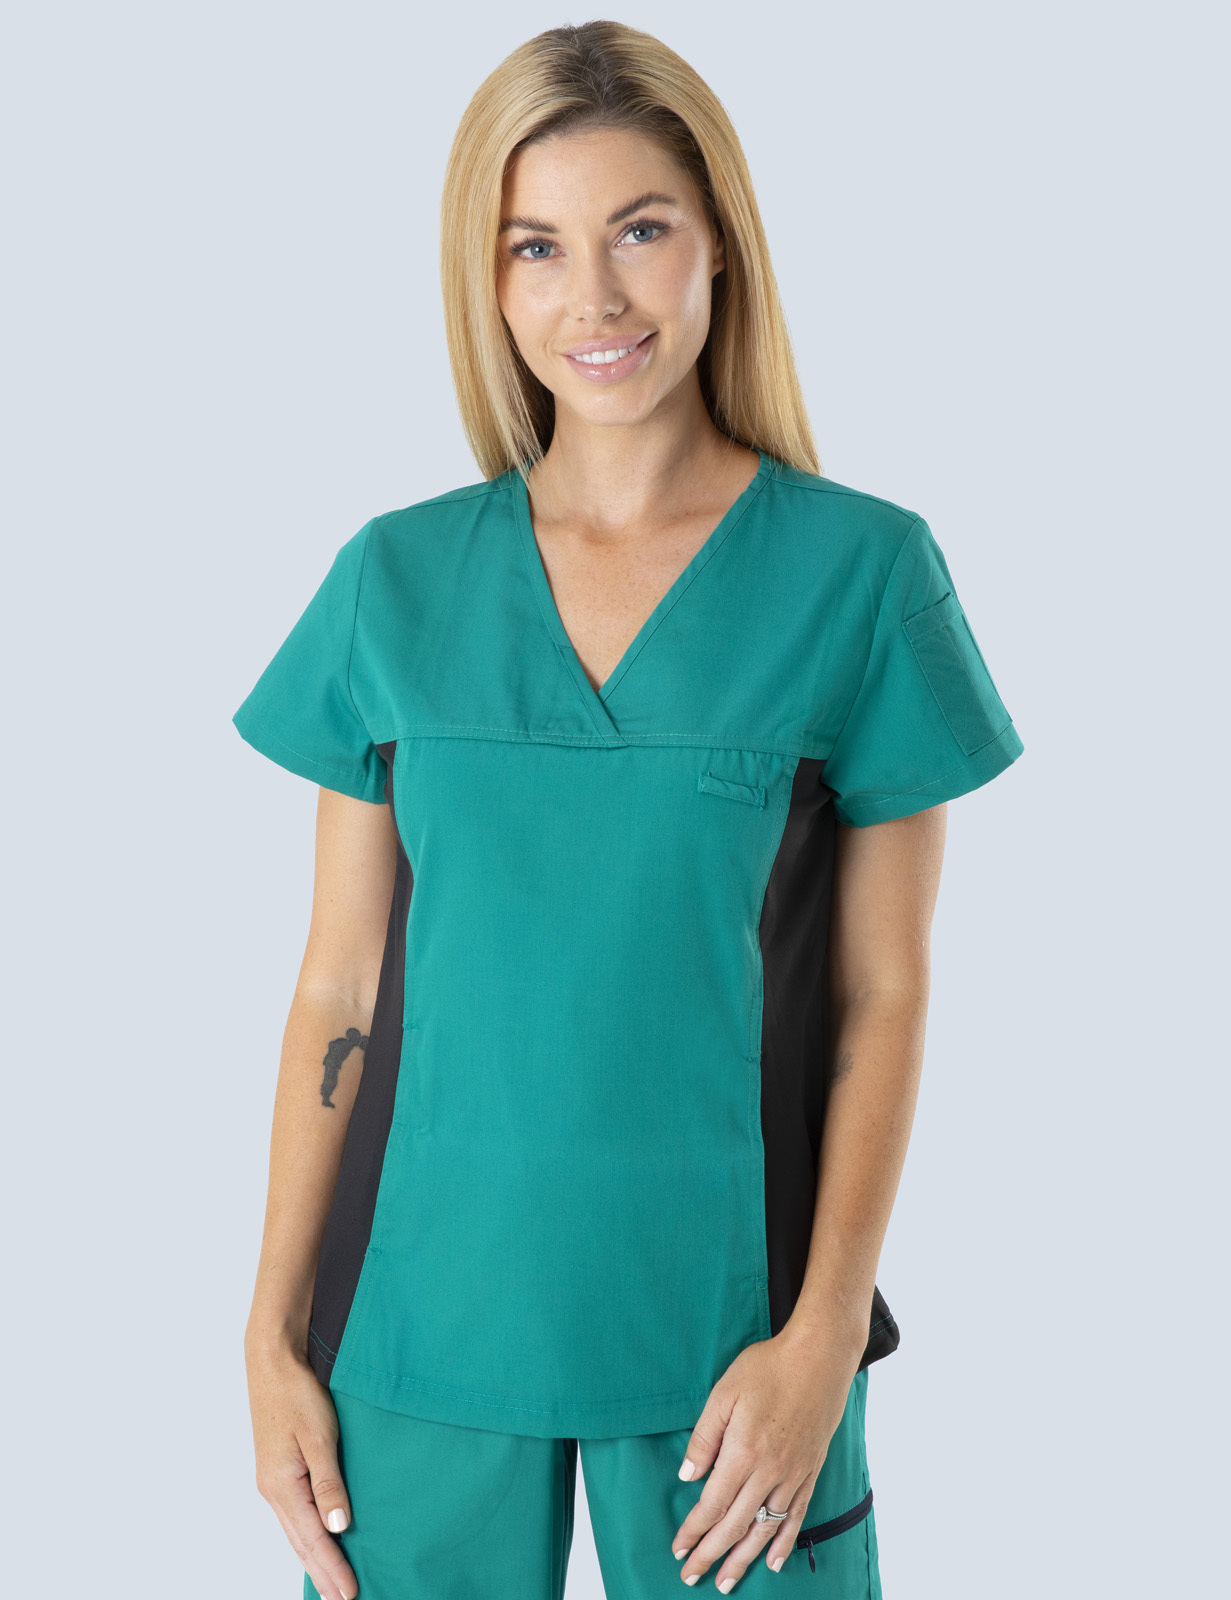 Canberra Hospital - Justice Health Department (Women's Fit Spandex Scrub Top in Hunter incl Logos)